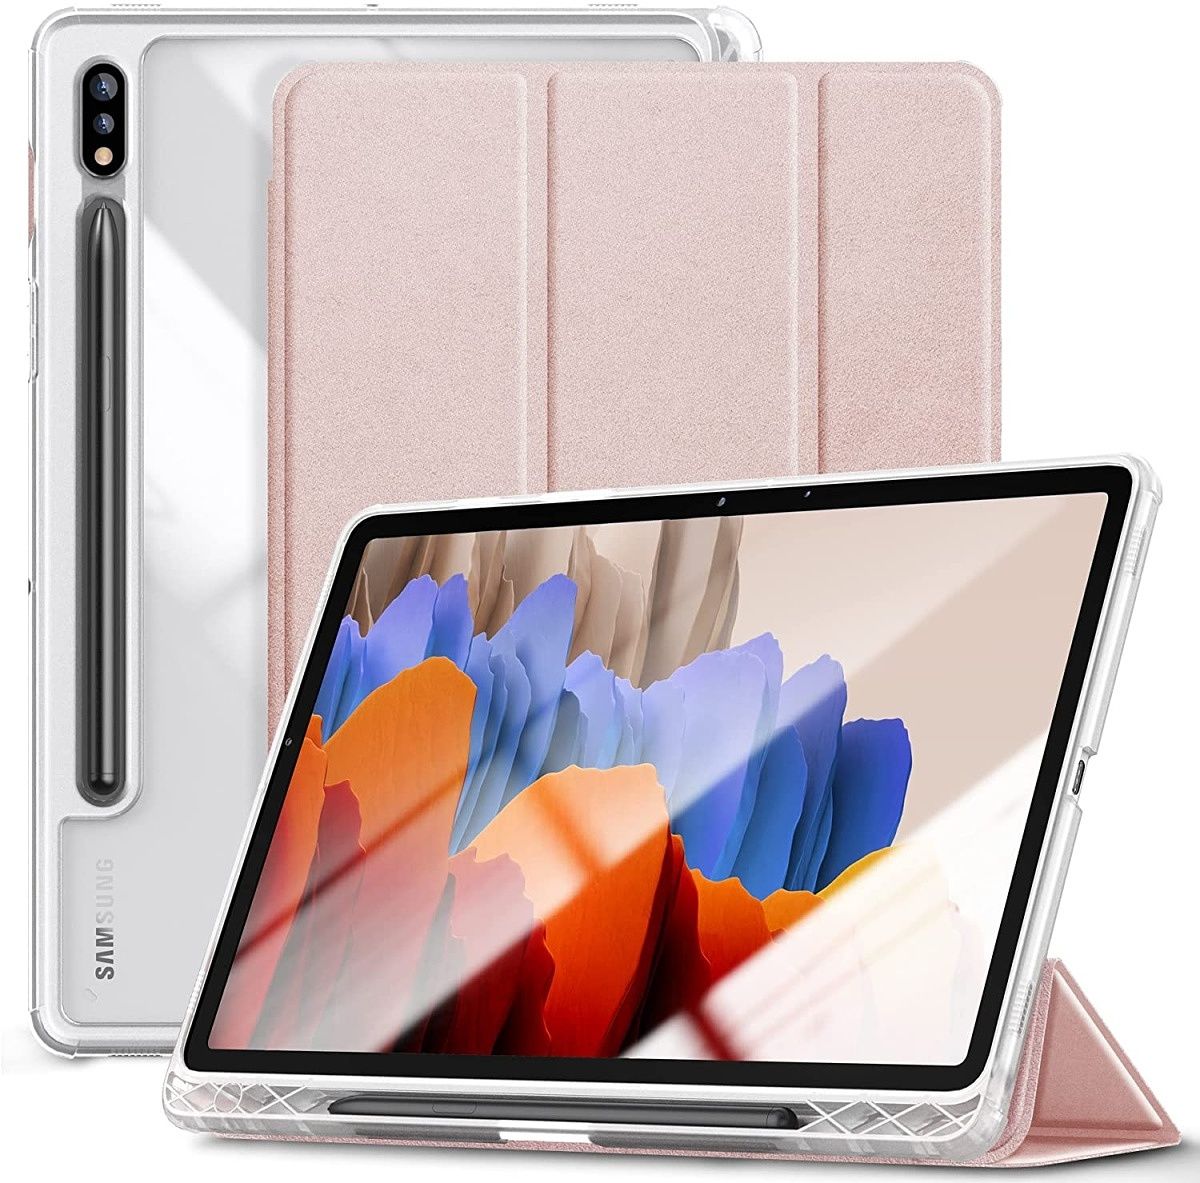 This case has a transparent back and a colored front, offering 360º protection for your tablet. It additionally supports smart display auto wake/sleep and kickstand mode.